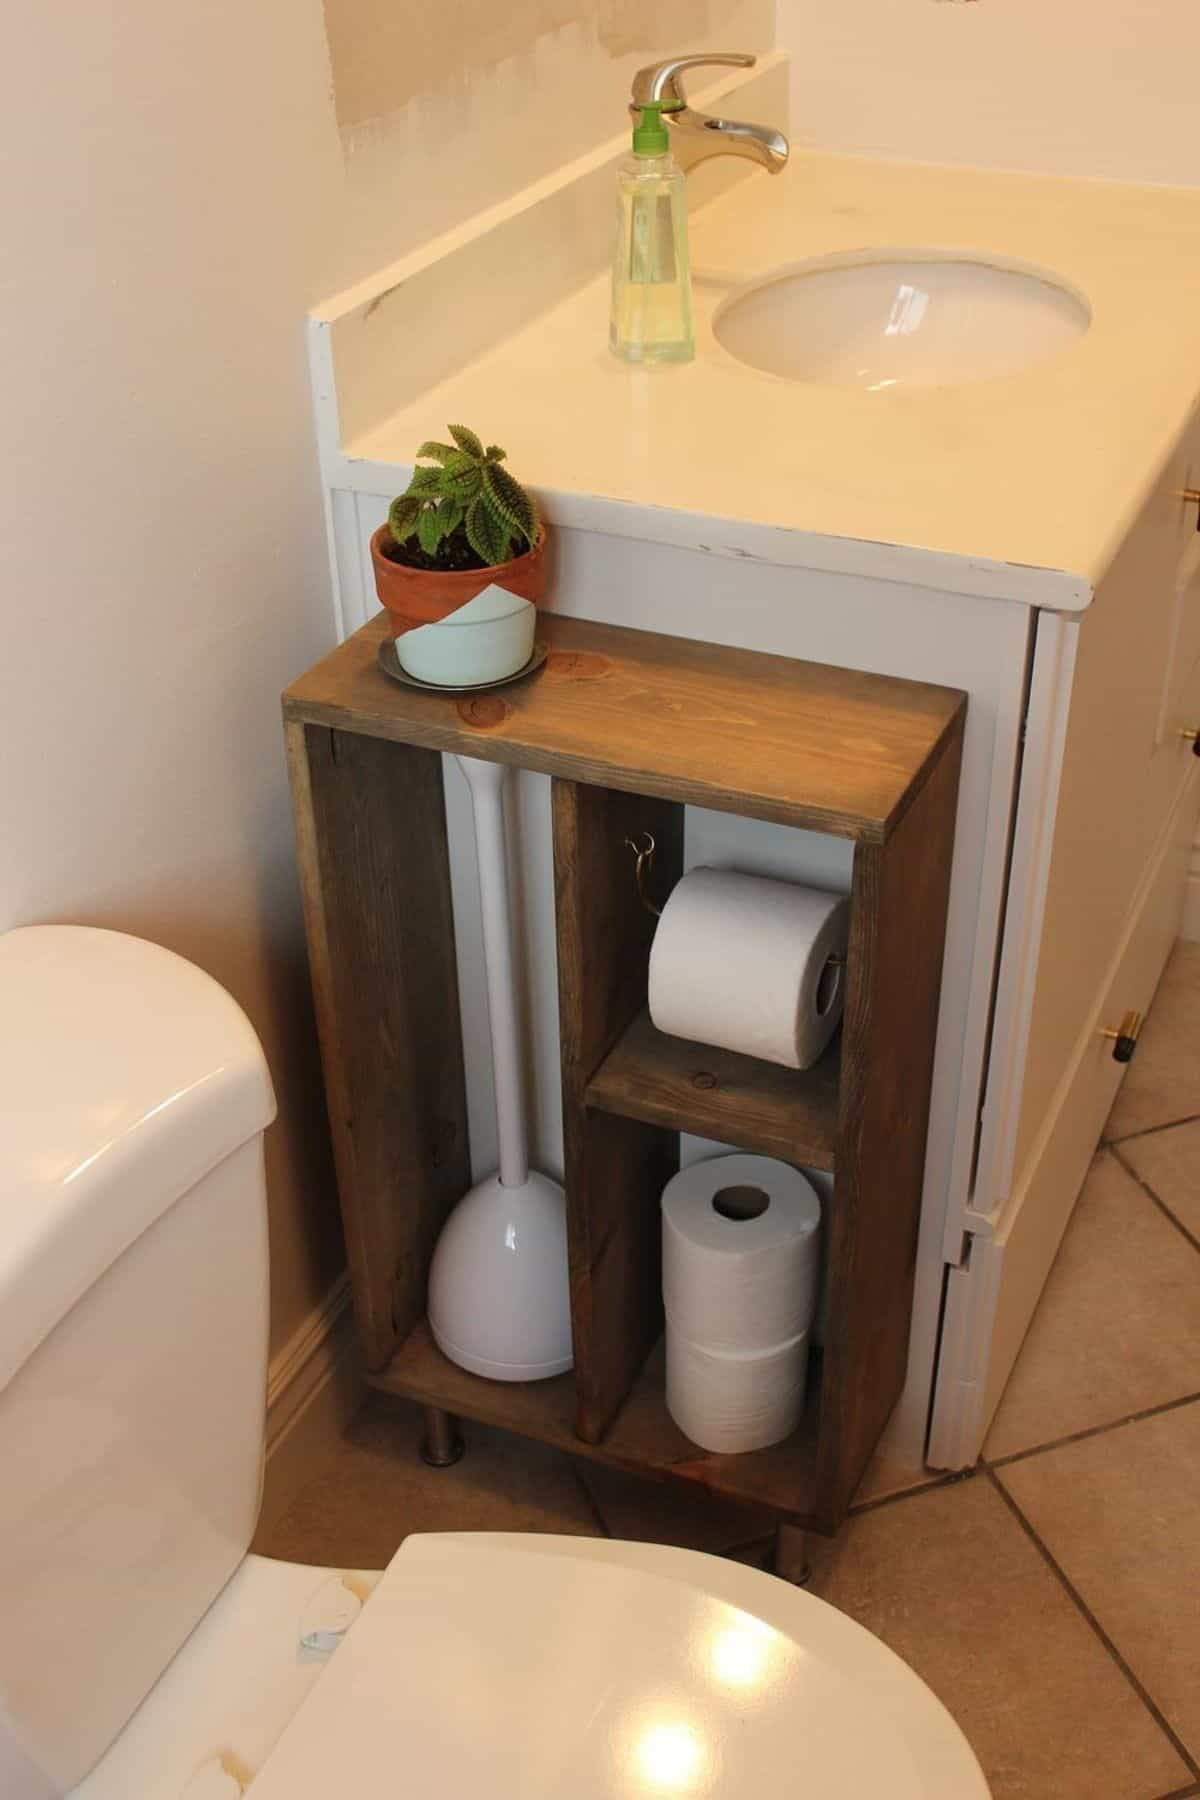 19. Great place to store toilet paper